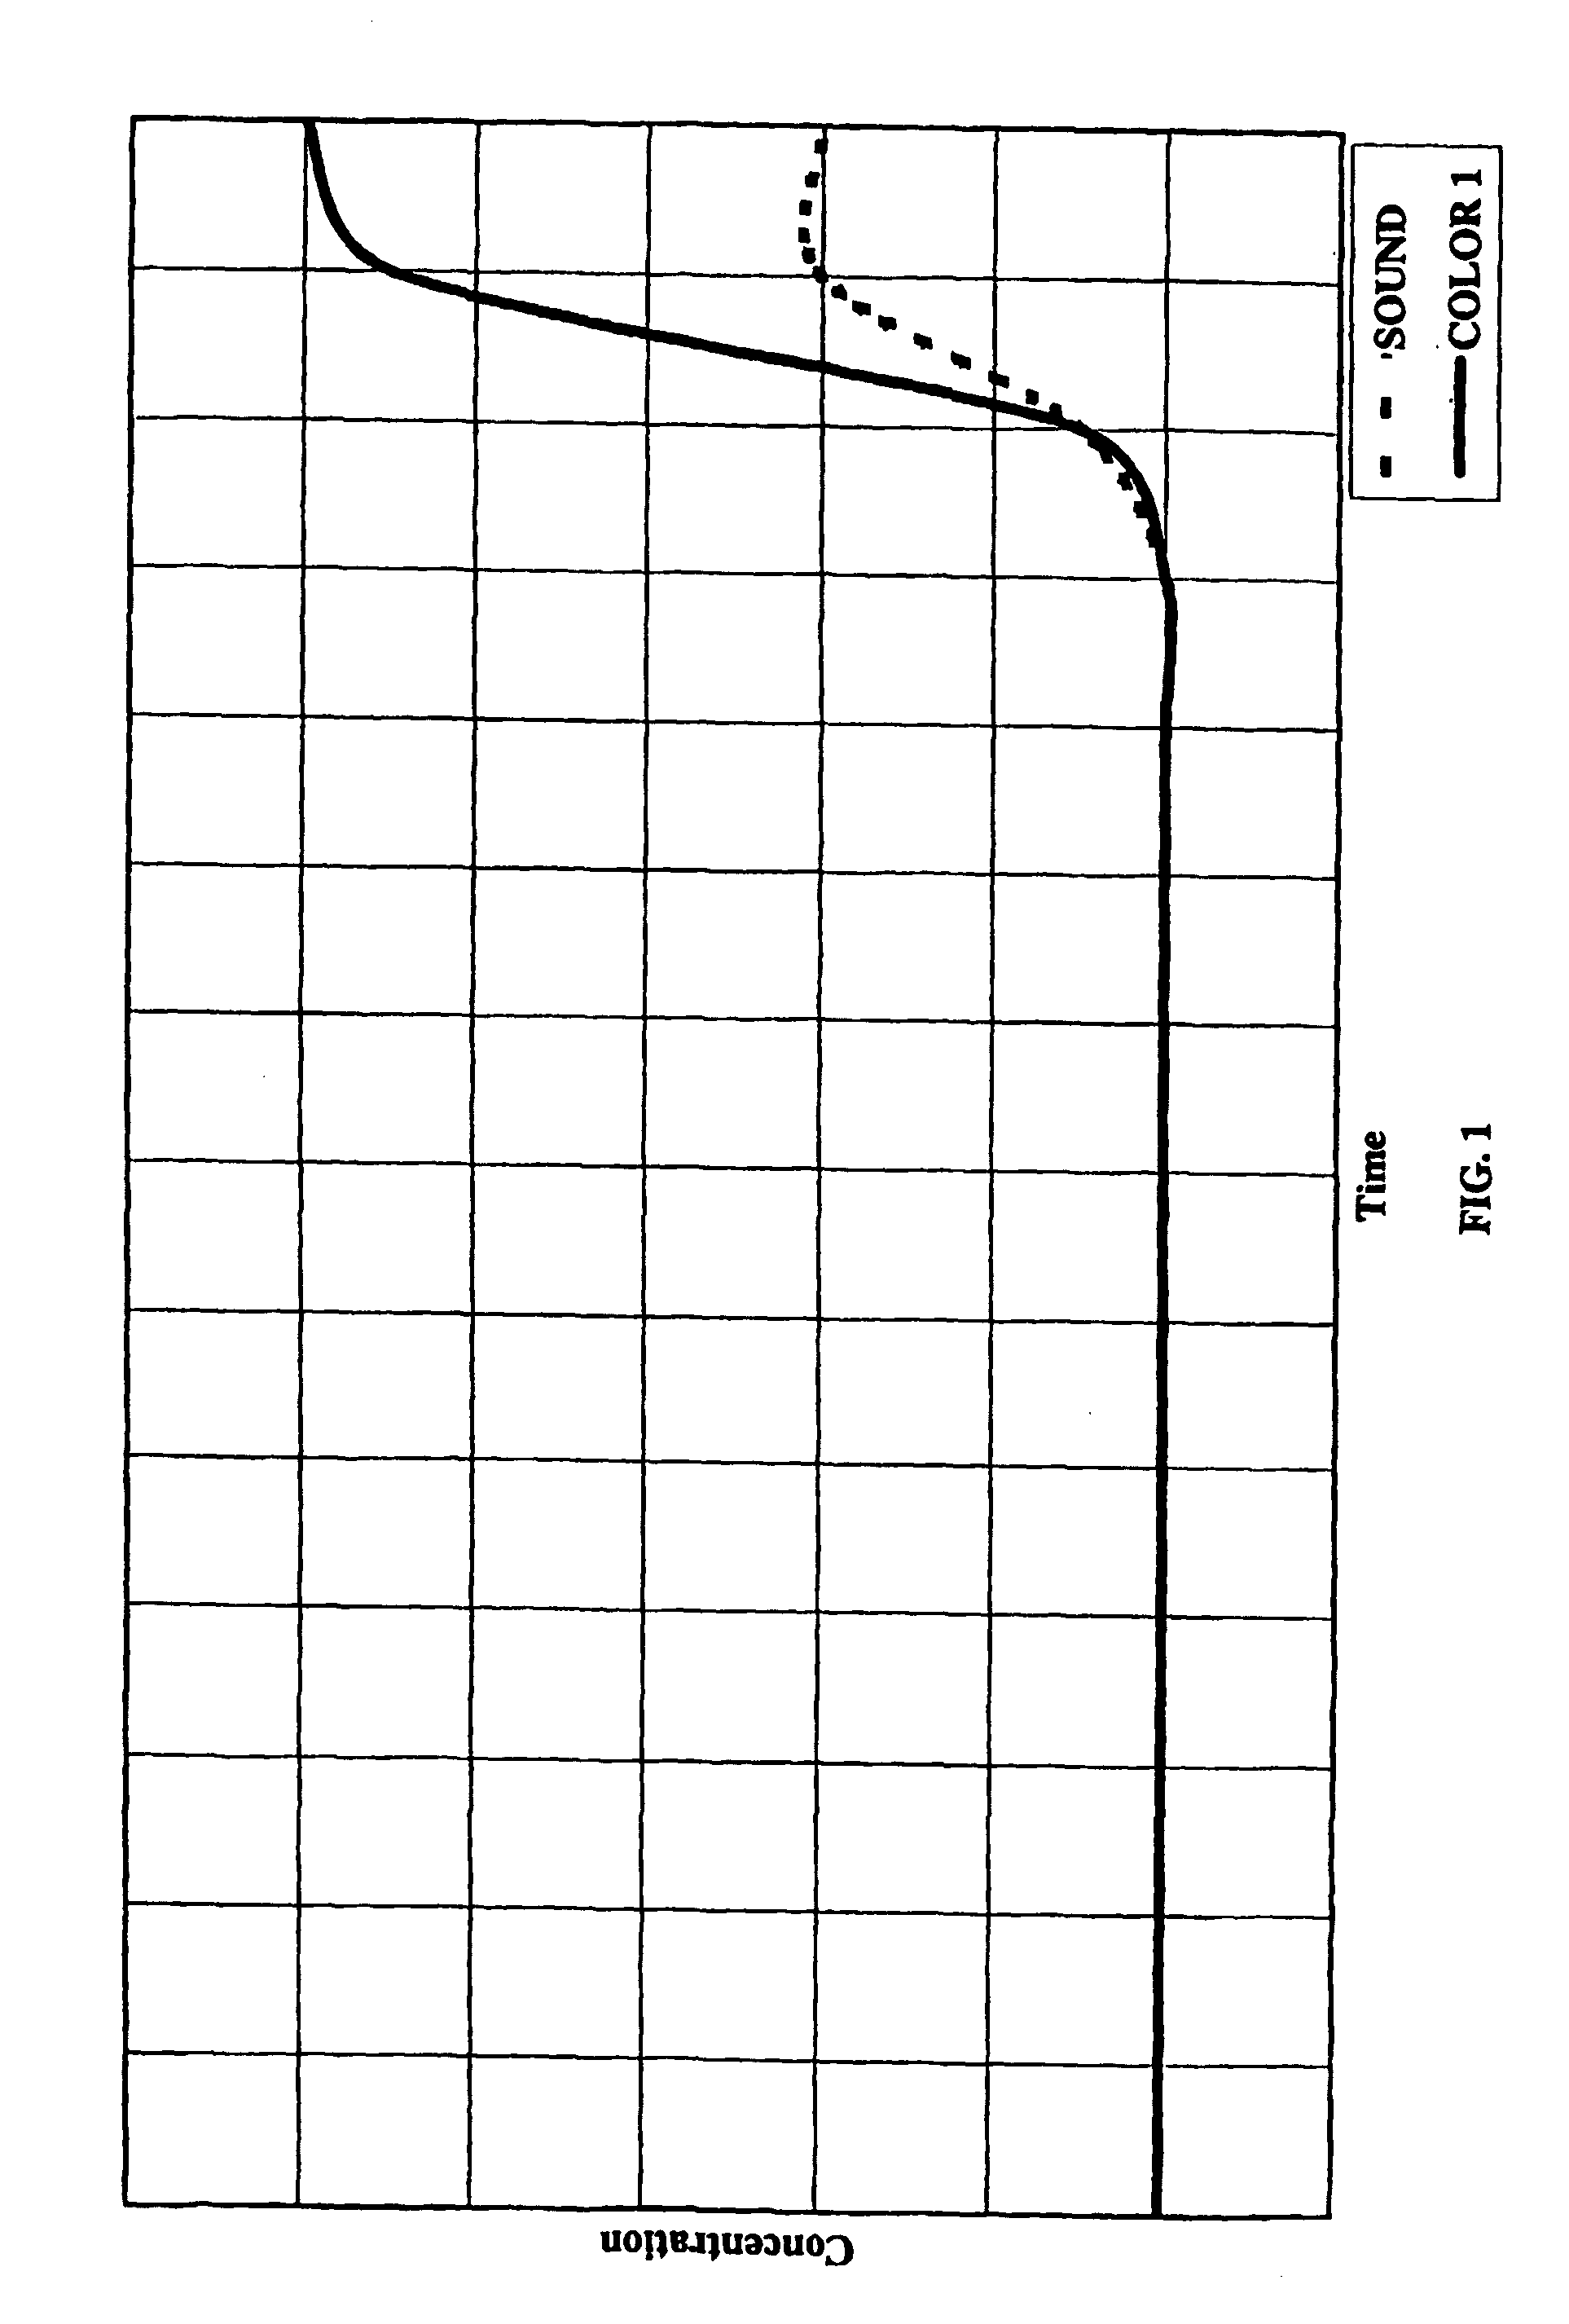 Aqueous activated components conveyed in a non-aqueous carrier system